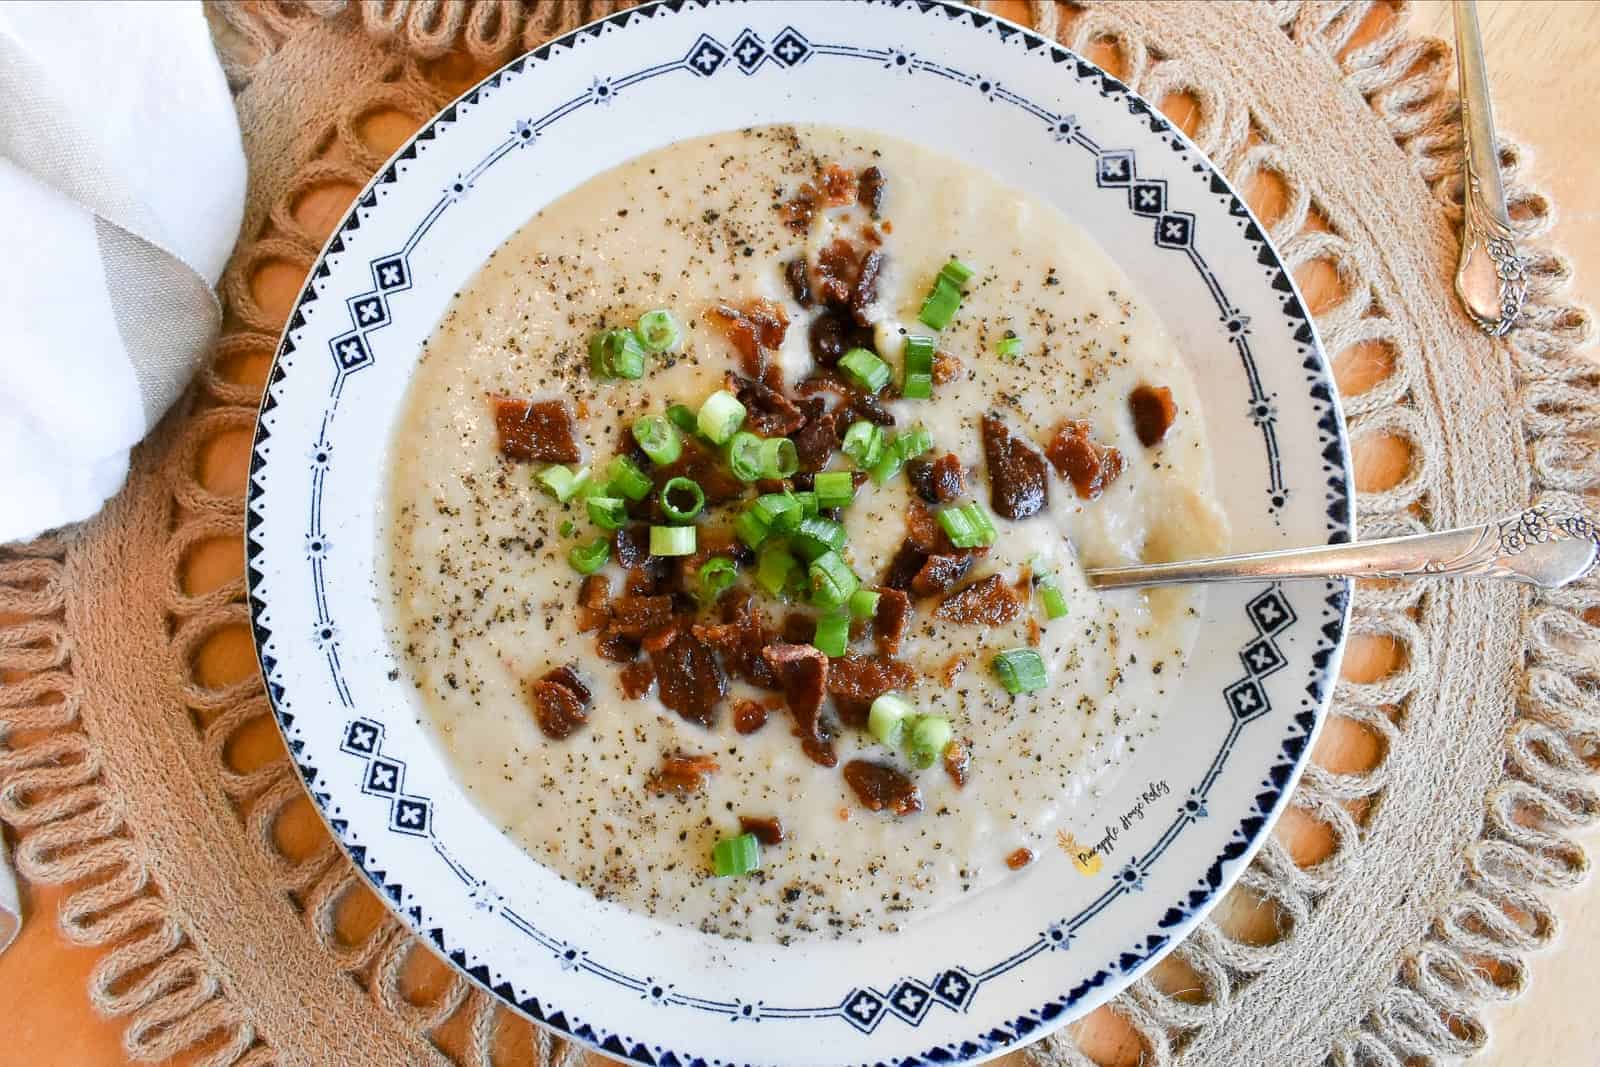 Slow Cooker Cauliflower Soup is an easy and delicious recipe that's Keto friendly and low carb! Just dump and go! Slow Cooker Recipes | Slow Cooker Recipes Healthy | Slow Cooker Recipes Easy | Freezer Friendly Recipes | Keto Recipes | Keto | Low Carb | Low Carb Recipes | Easy Healthy Lunch Ideas | Lunch Ideas Easy | Lunch Ideas Healthy | Crock Pot Recipes | Crock Pot Recipes Healthy | Crock Pot Recipes Easy | Healthy Soup Recipes | Easy Recipes | Easy Recipes Healthy